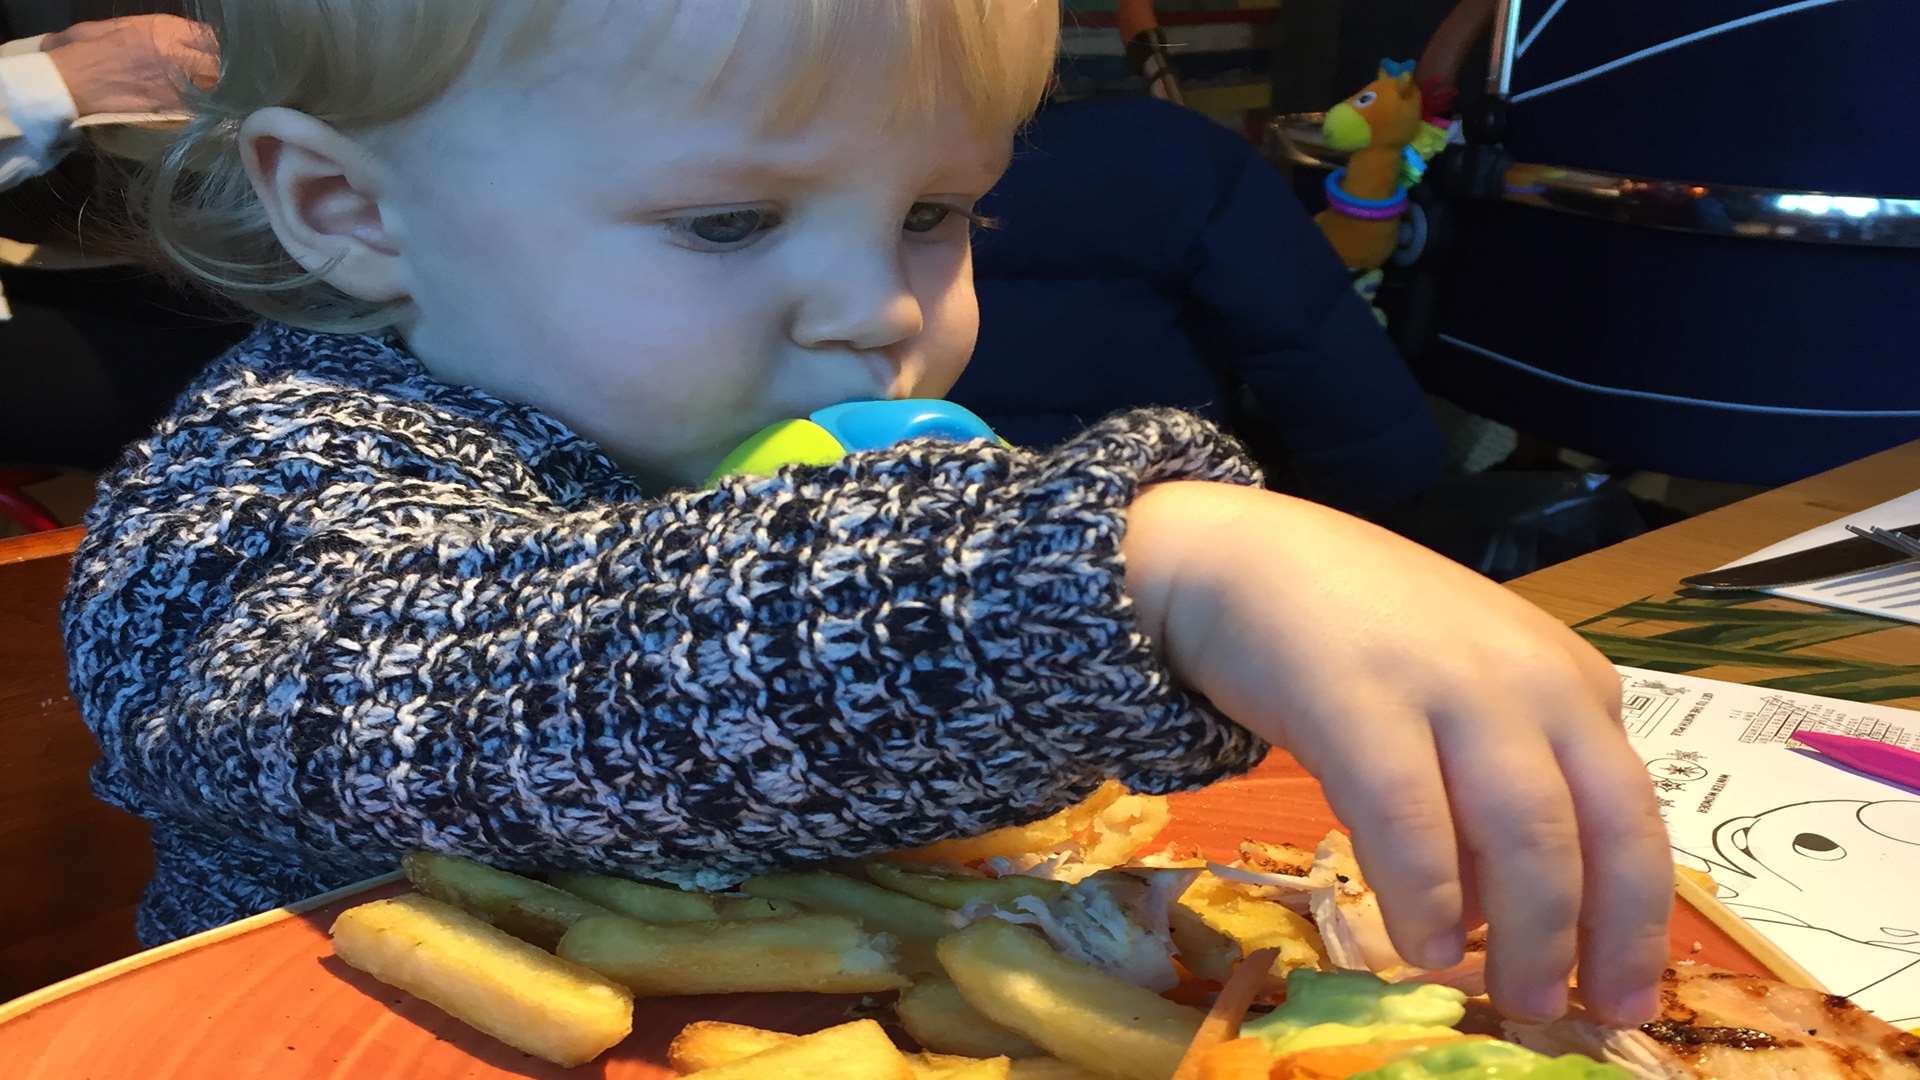 Noah prefers playing with his veg to actually eating it